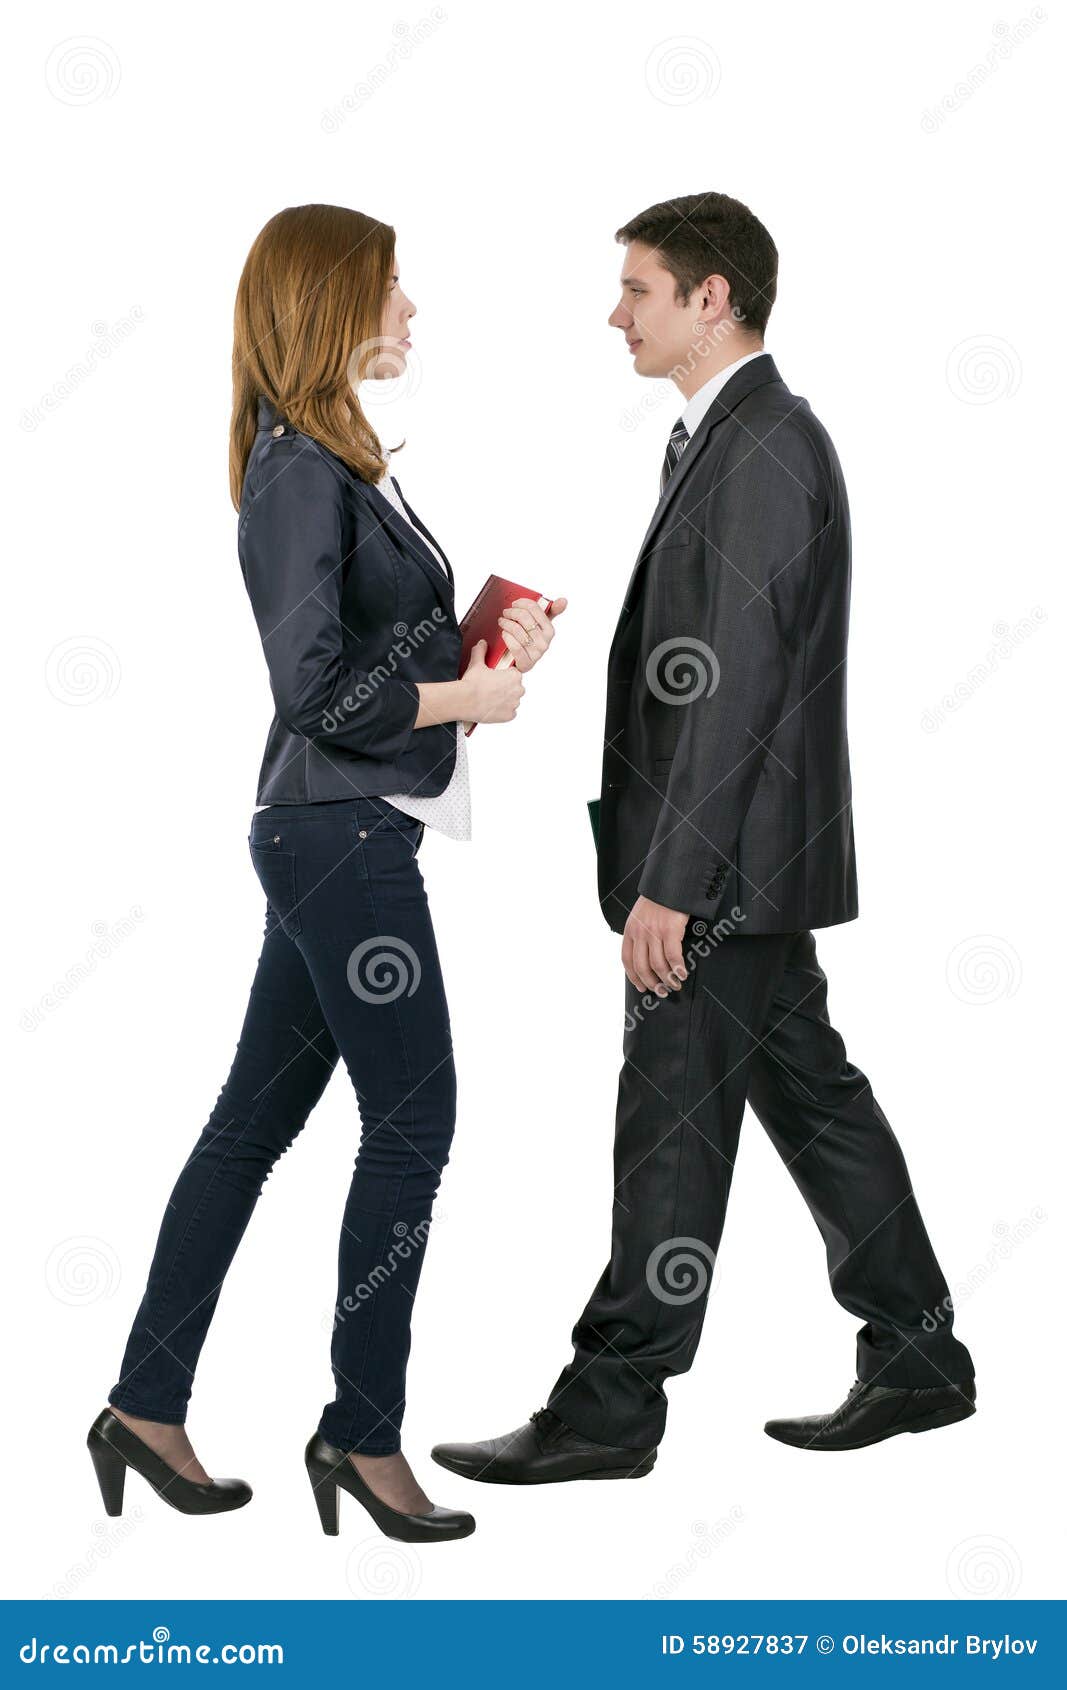 Officially Dressed Male and Female Walking Towards Stock Image - Image ...